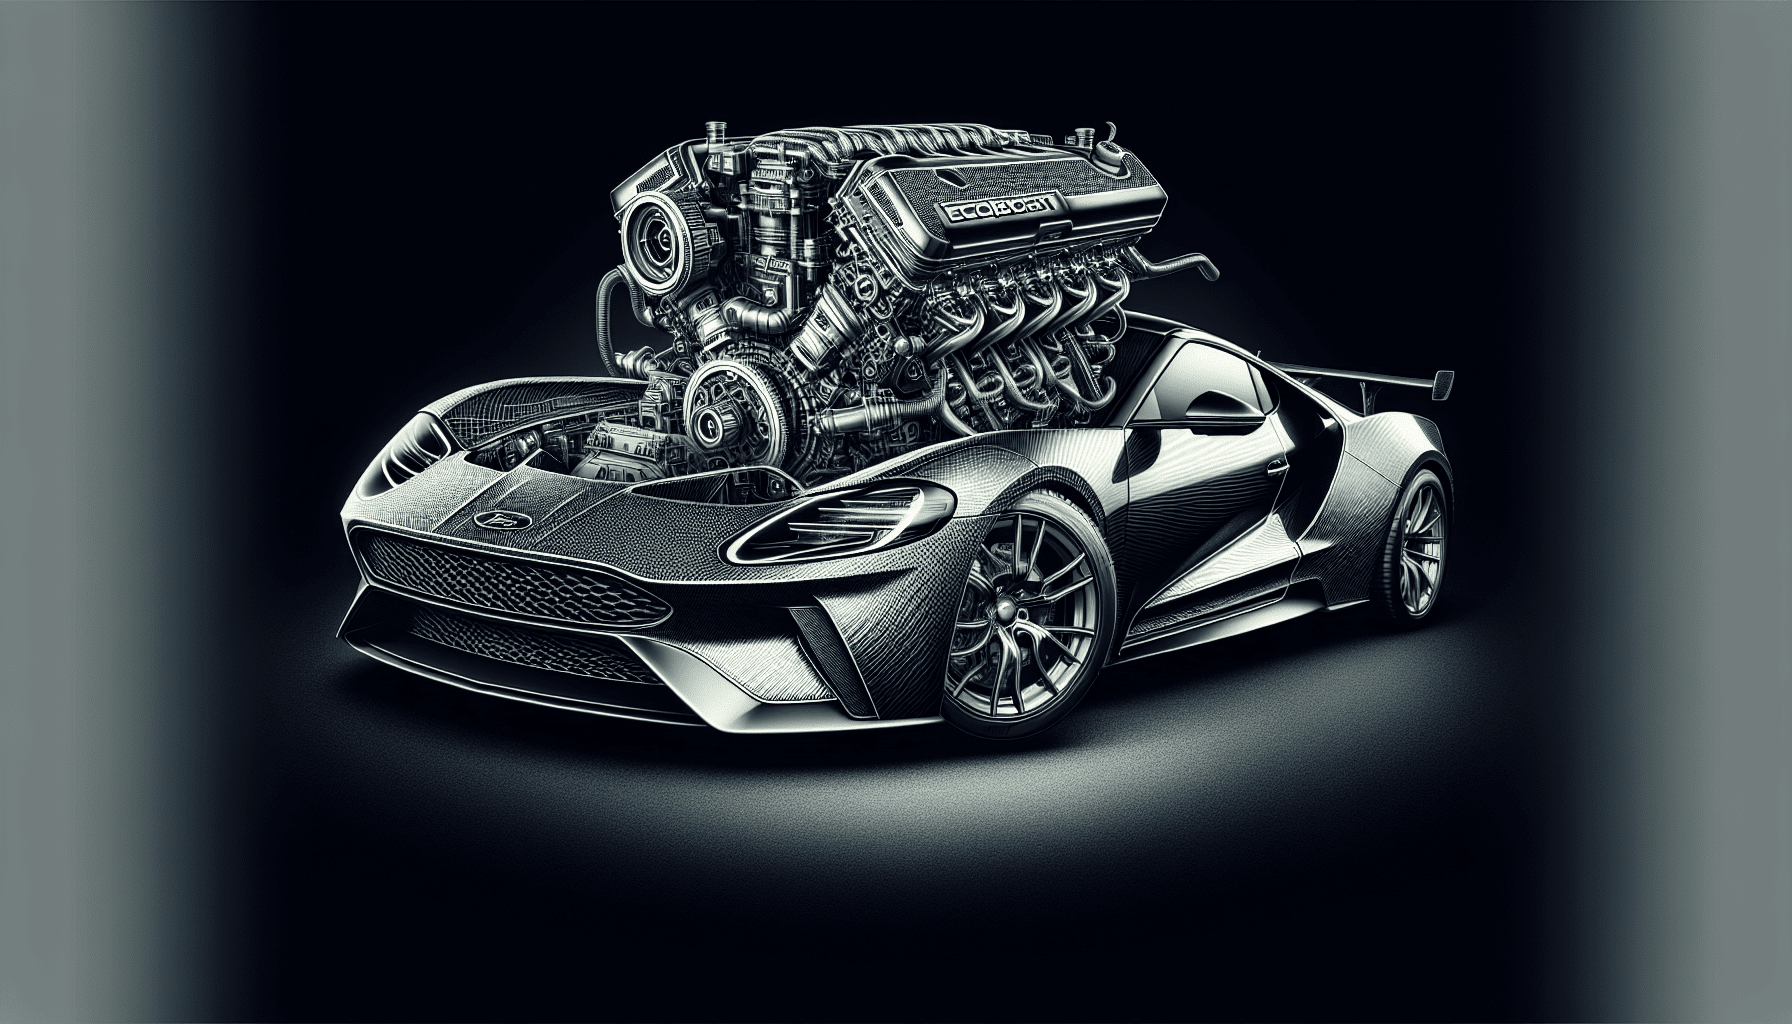 What Is The Horsepower Of The 3.5 L EcoBoost V6 Engine?